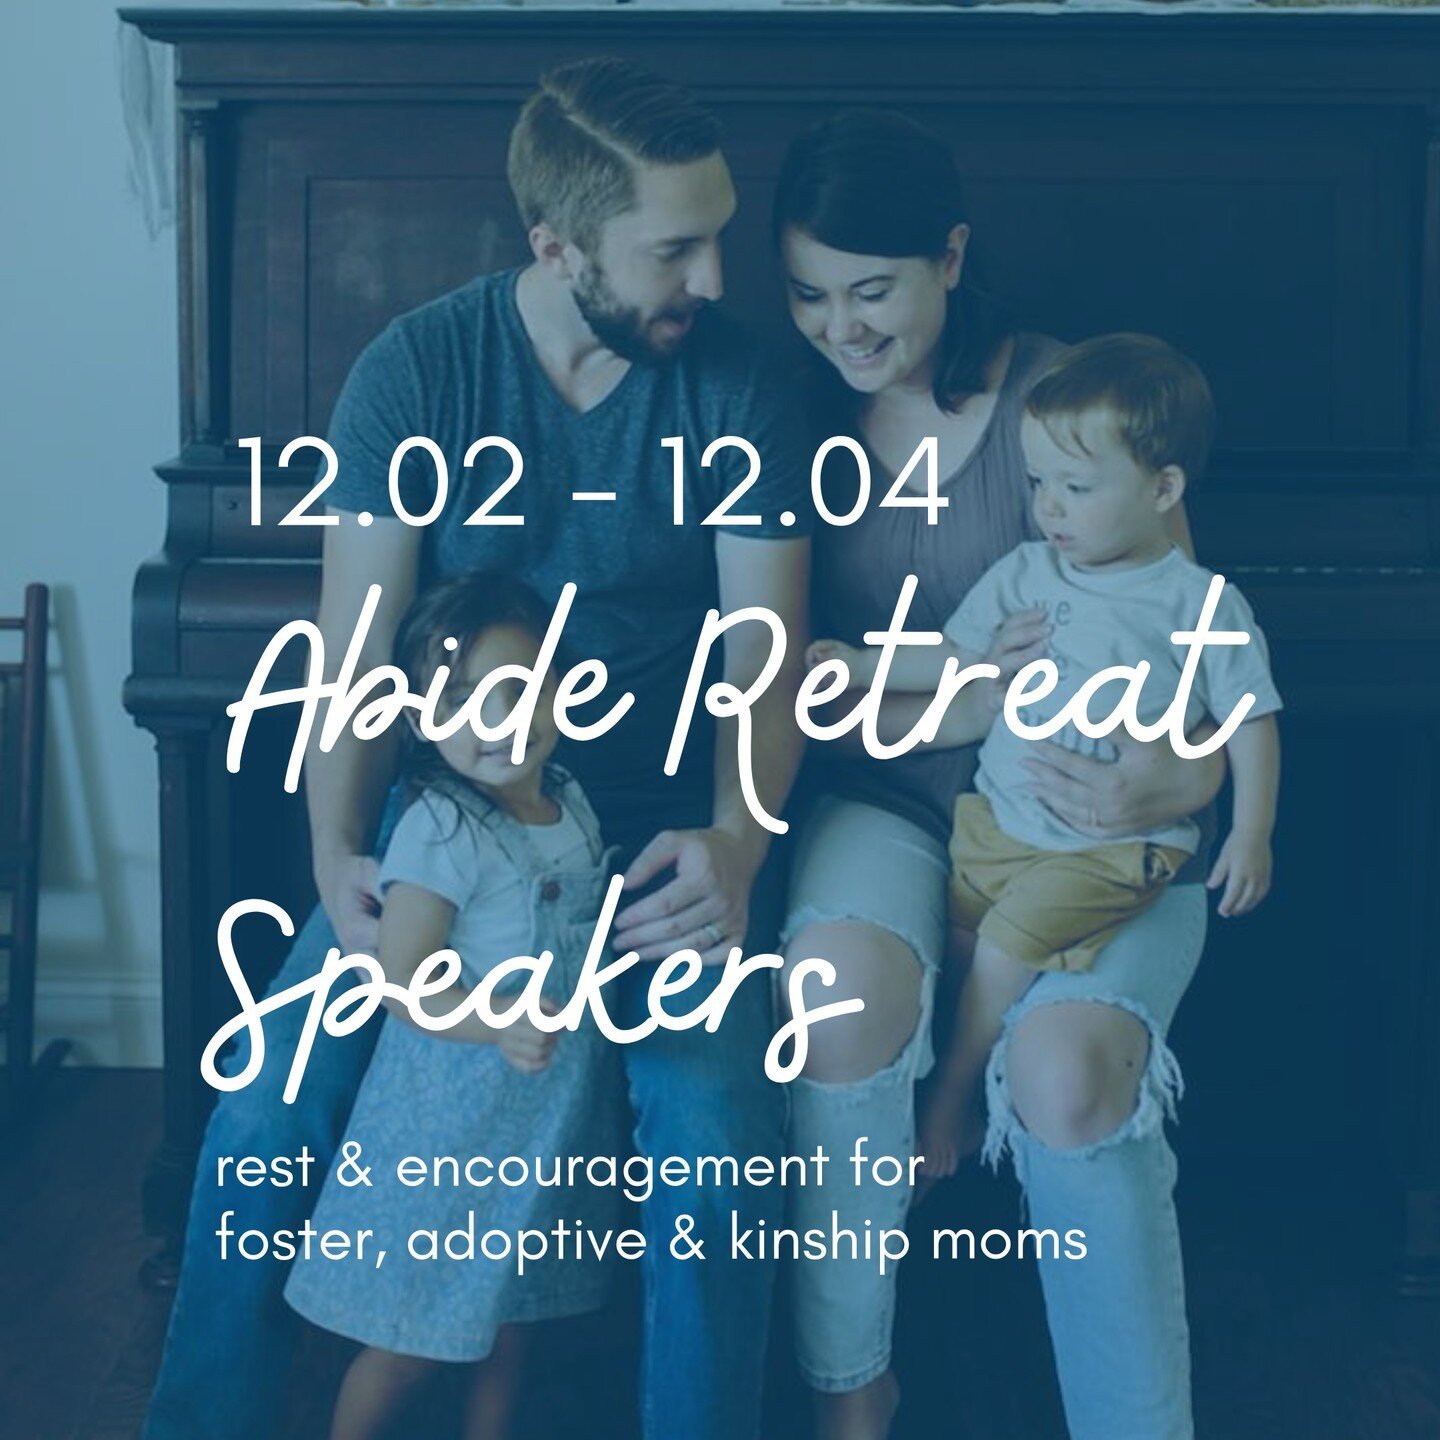 Meet our speakers for the Abide Retreat (in two weeks!) 😊

This is a team of strong, tender-hearted, and compassionate women who can't wait to share their experience, knowledge, and heart with you.

The Abide Retreat is for any foster, adoptive, or 